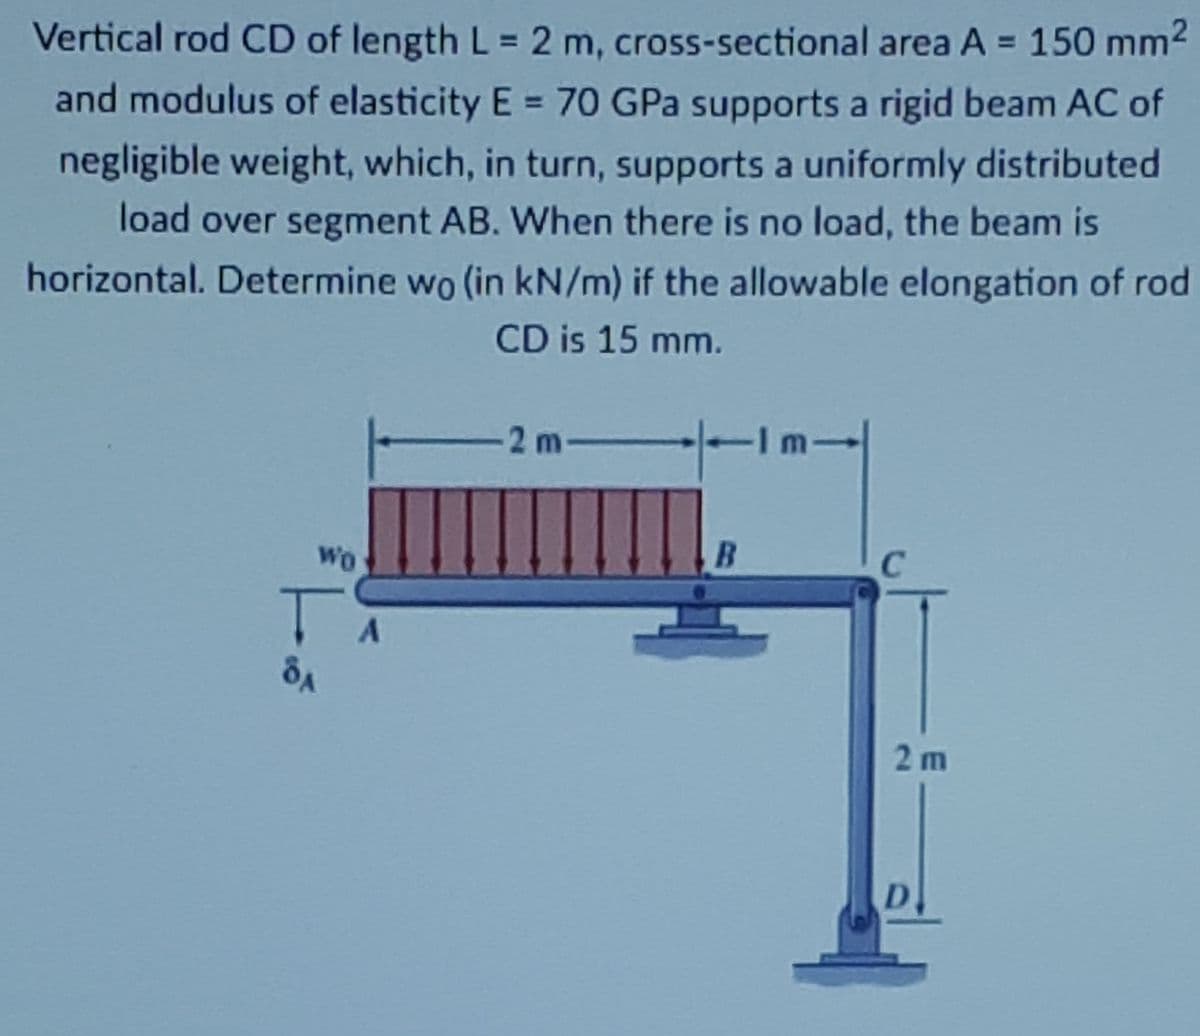 Vertical rod CD of length L = 2 m, cross-sectional area A = 150 mm2
%3D
%3D
and modulus of elasticity E = 70 GPa supports a rigid beam AC of
negligible weight, which, in turn, supports a uniformly distributed
load over segment AB. When there is no load, the beam is
horizontal. Determine wo (in kN/m) if the allowable elongation of rod
CD is 15 mm.
2 m
WO
B.
C
2 m
D.
